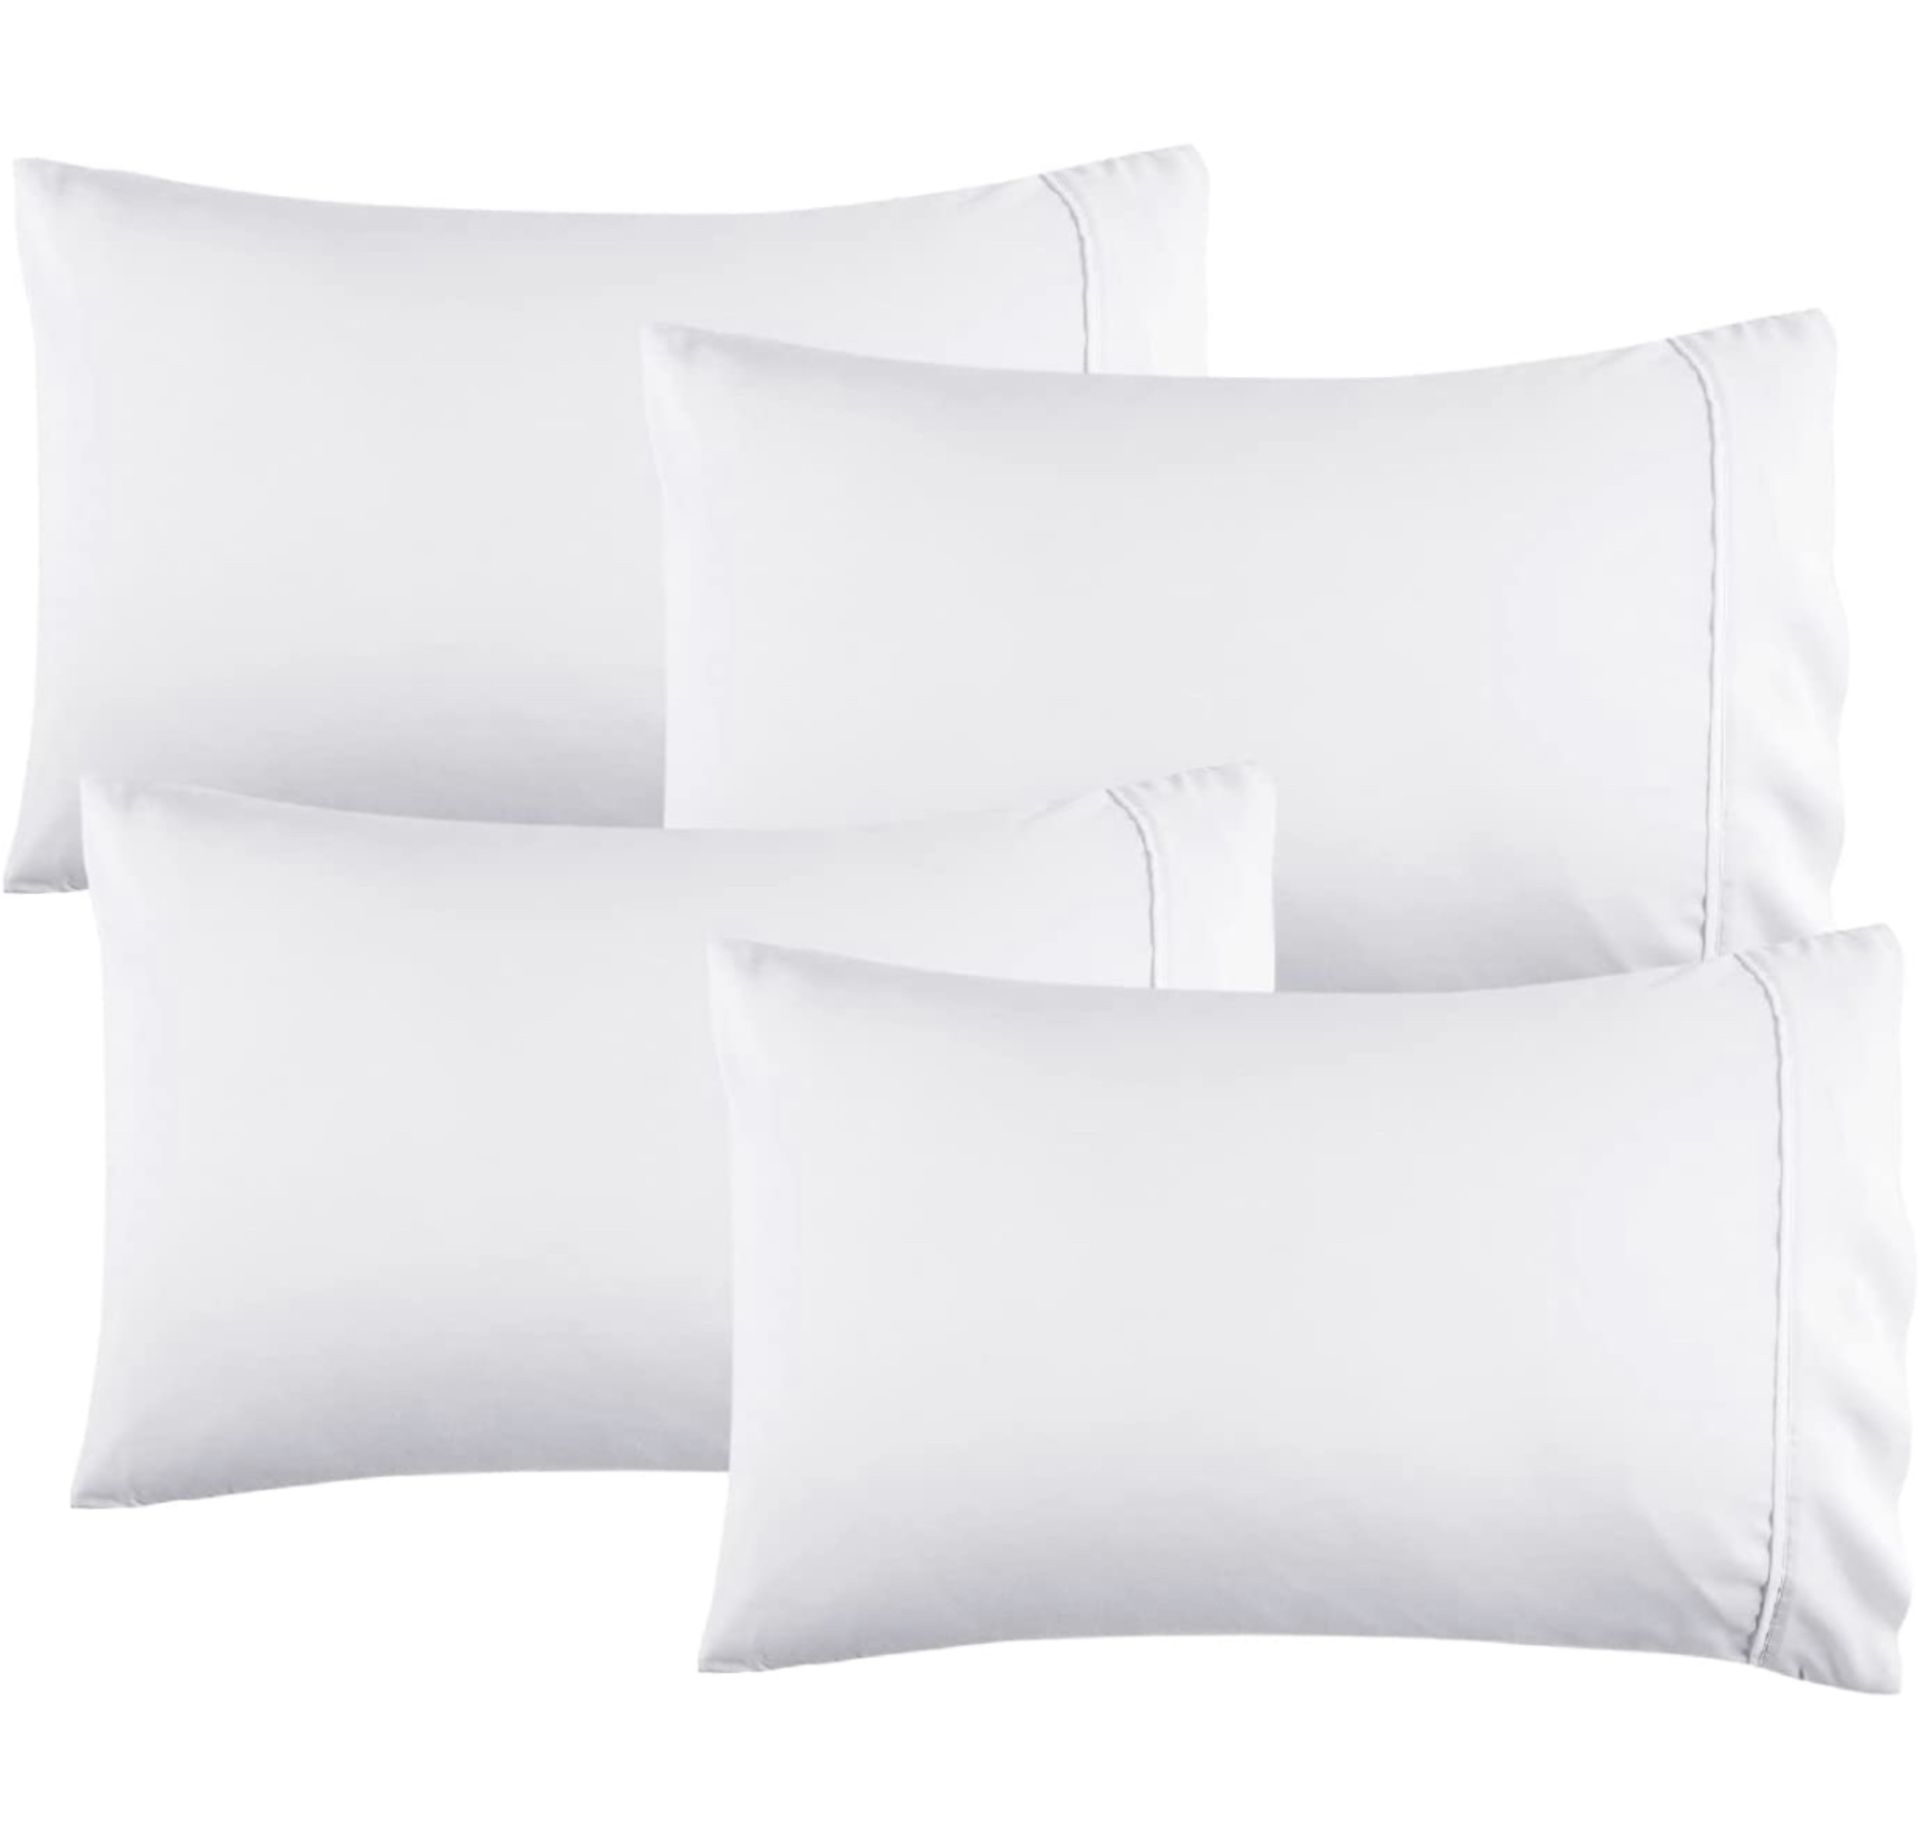 Besure Brushed Microfibre Pillow Cases, 2 packs of 4